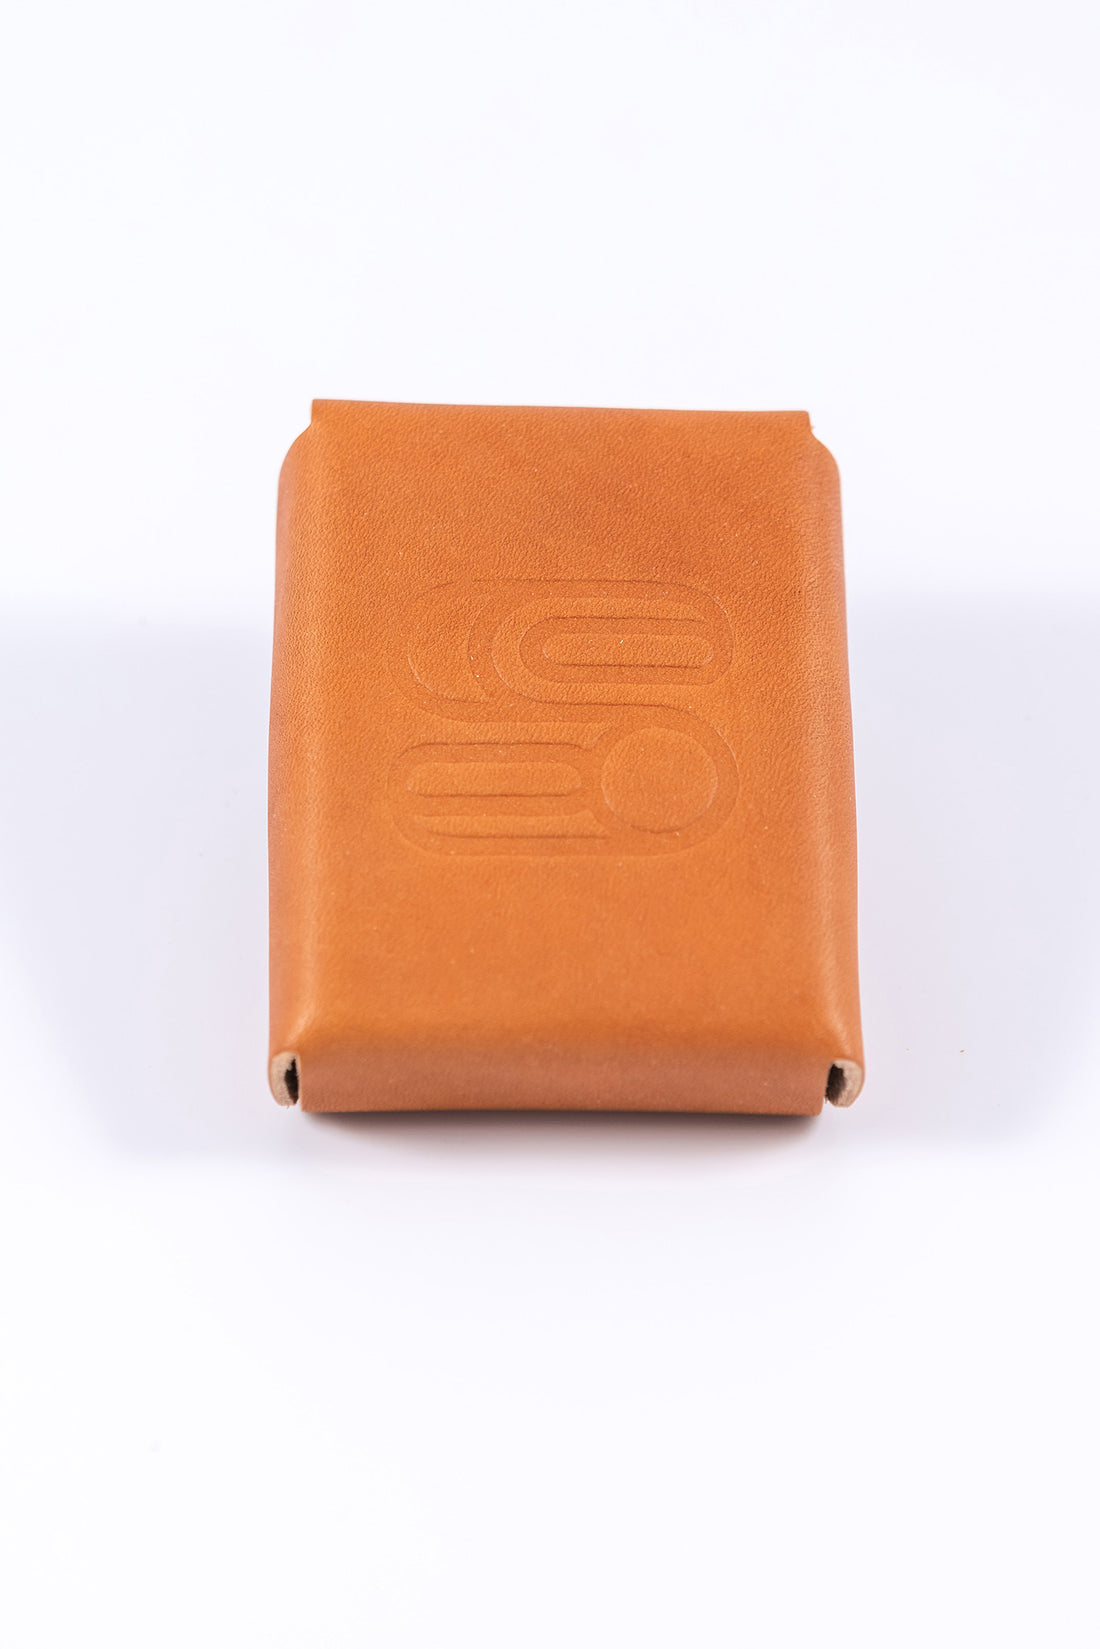 Leather playing card case made from light brown vegetable tanned leather embossed with the Sound As Ever logo